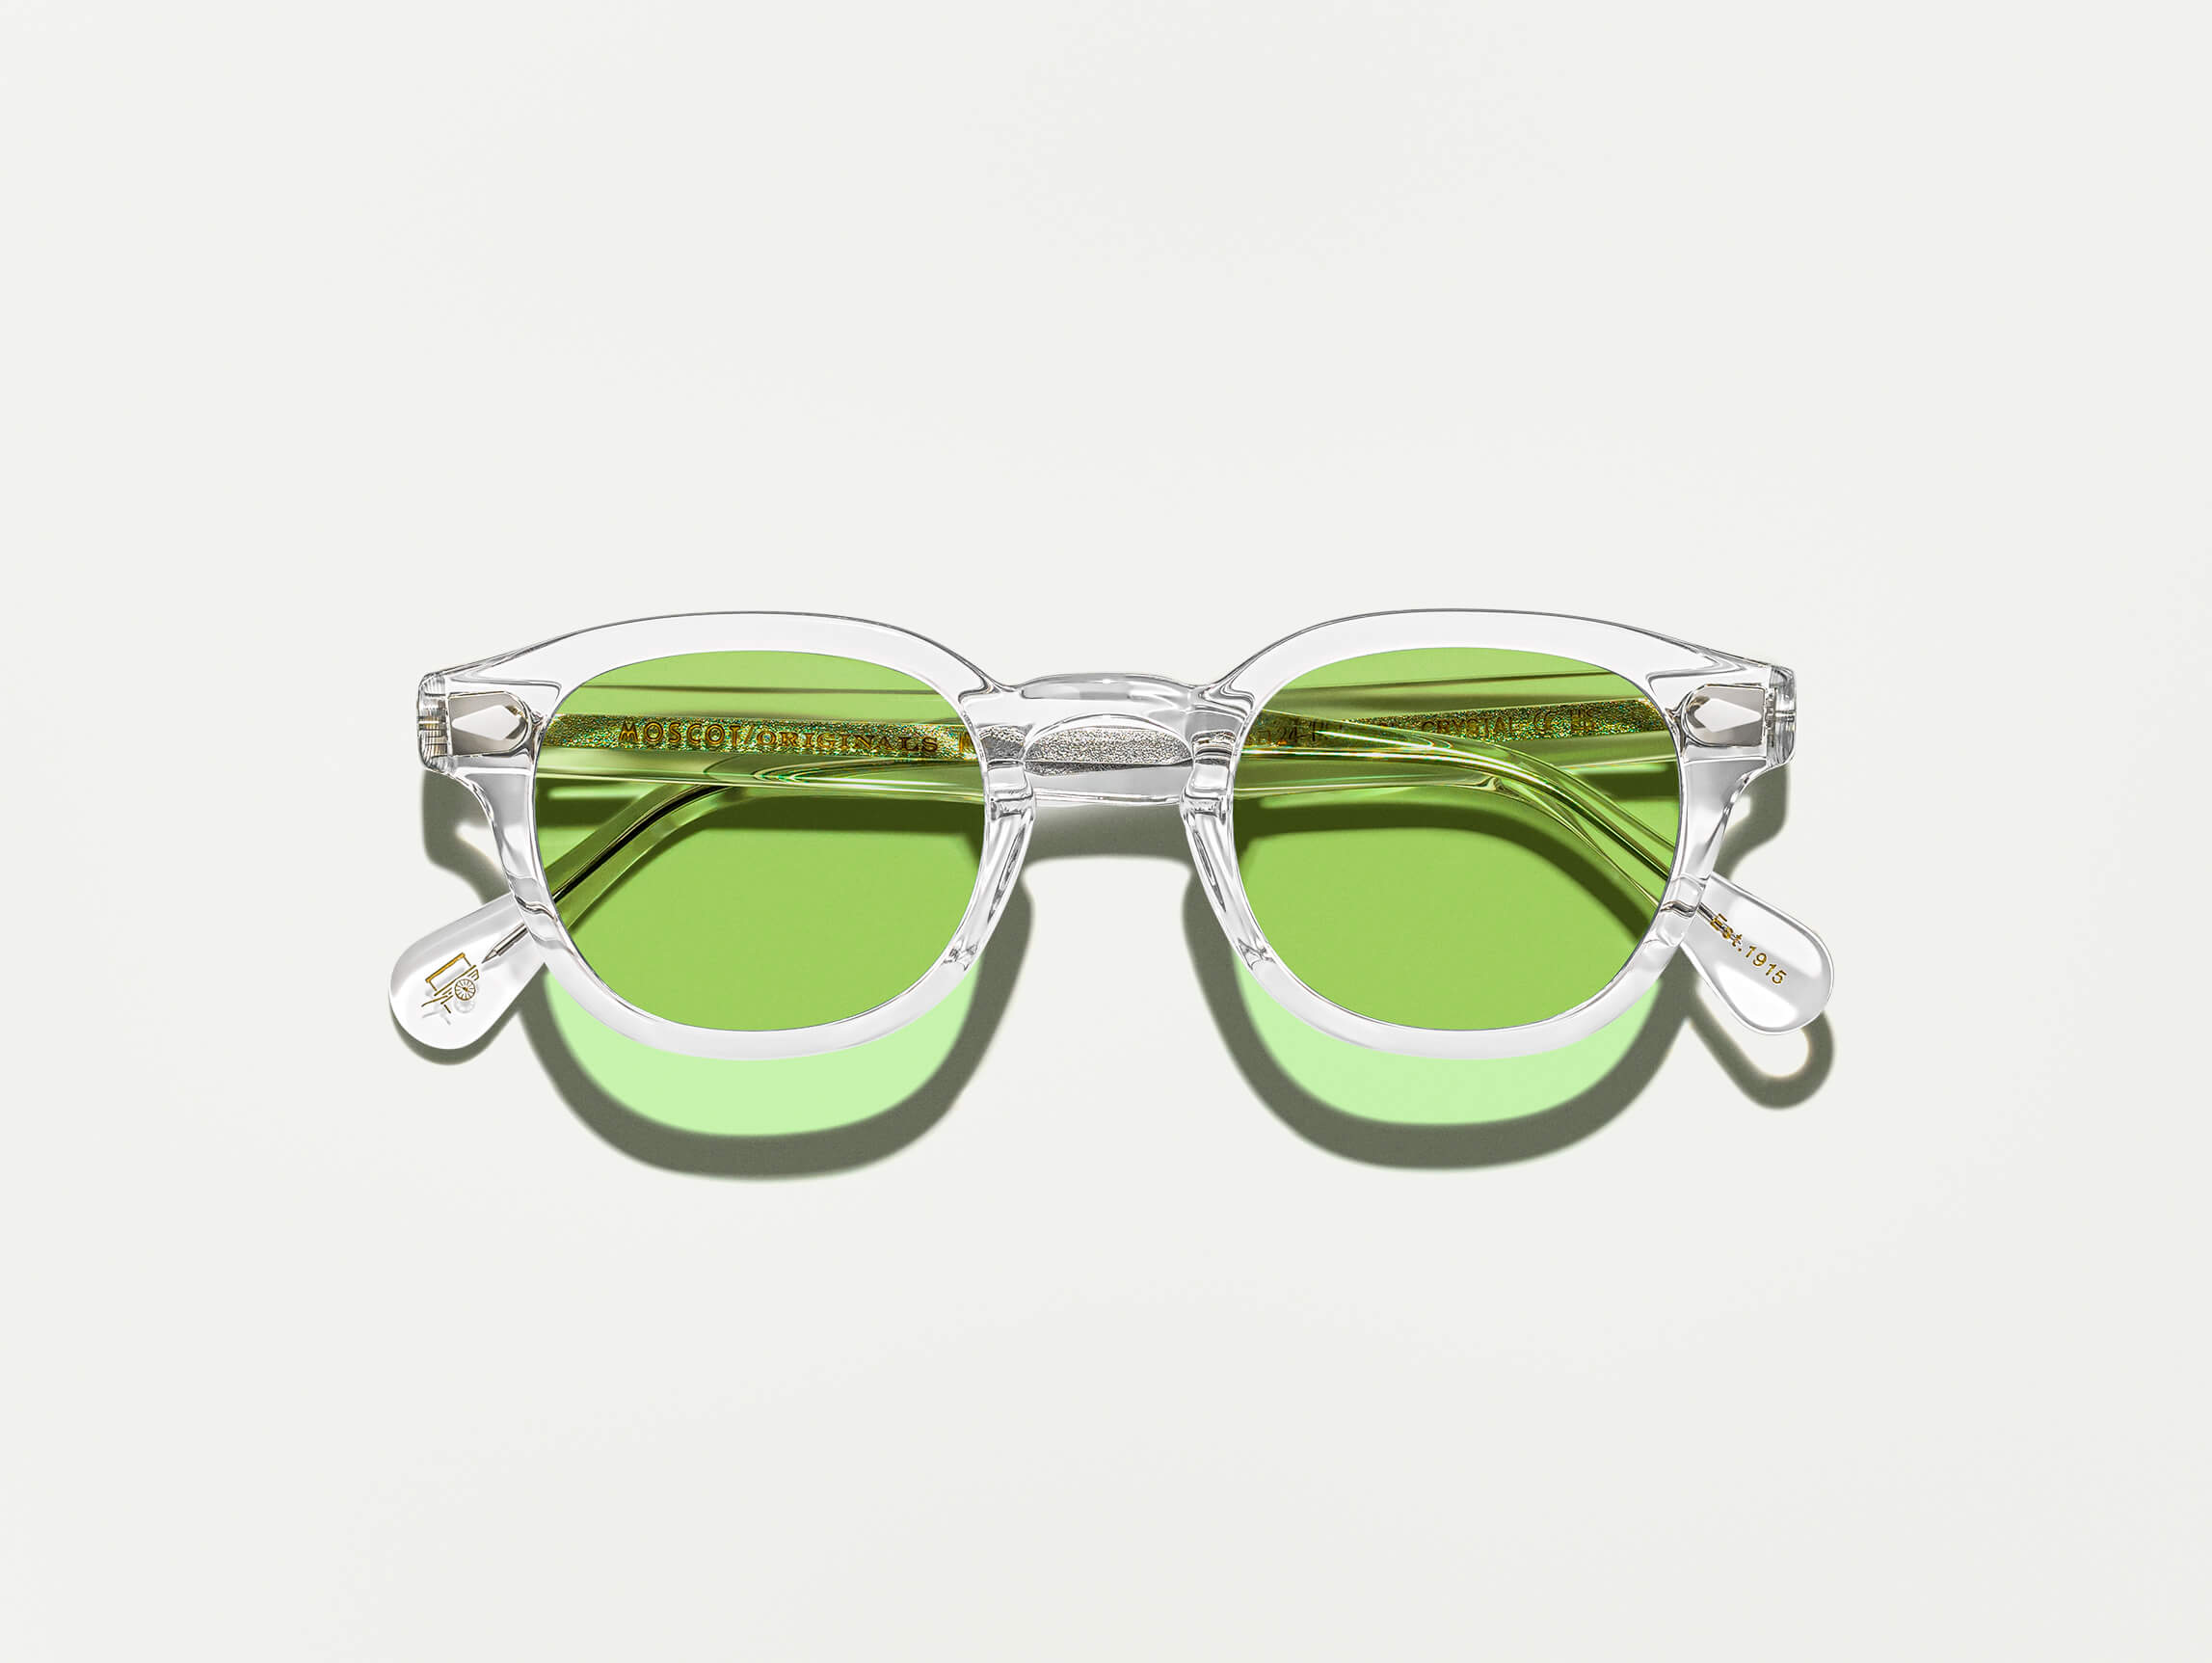 The LEMTOSH Crystal with Garnet Green Tinted Lenses